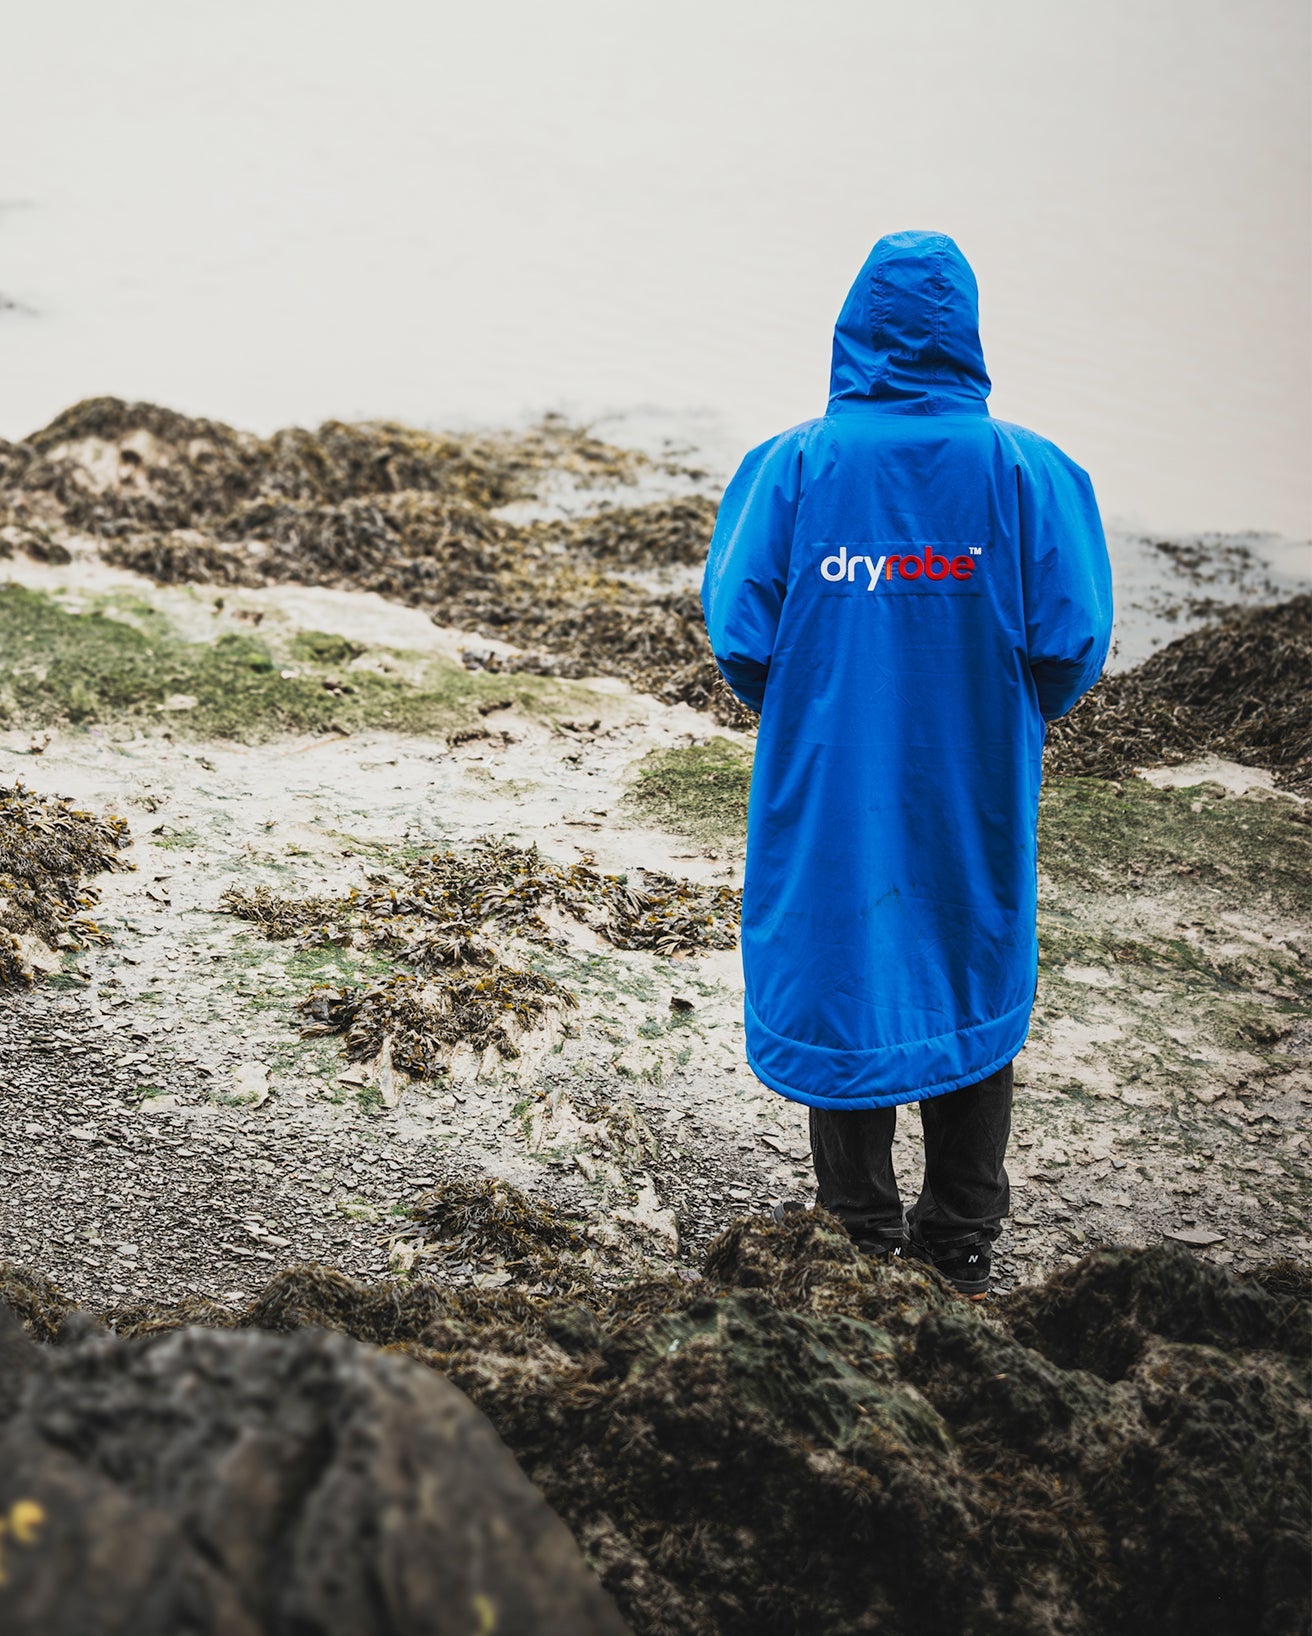 *MALE* standing on a beach with back to the camera, wearing Cobalt Blue Black dryrobe® Advance Long Sleeve